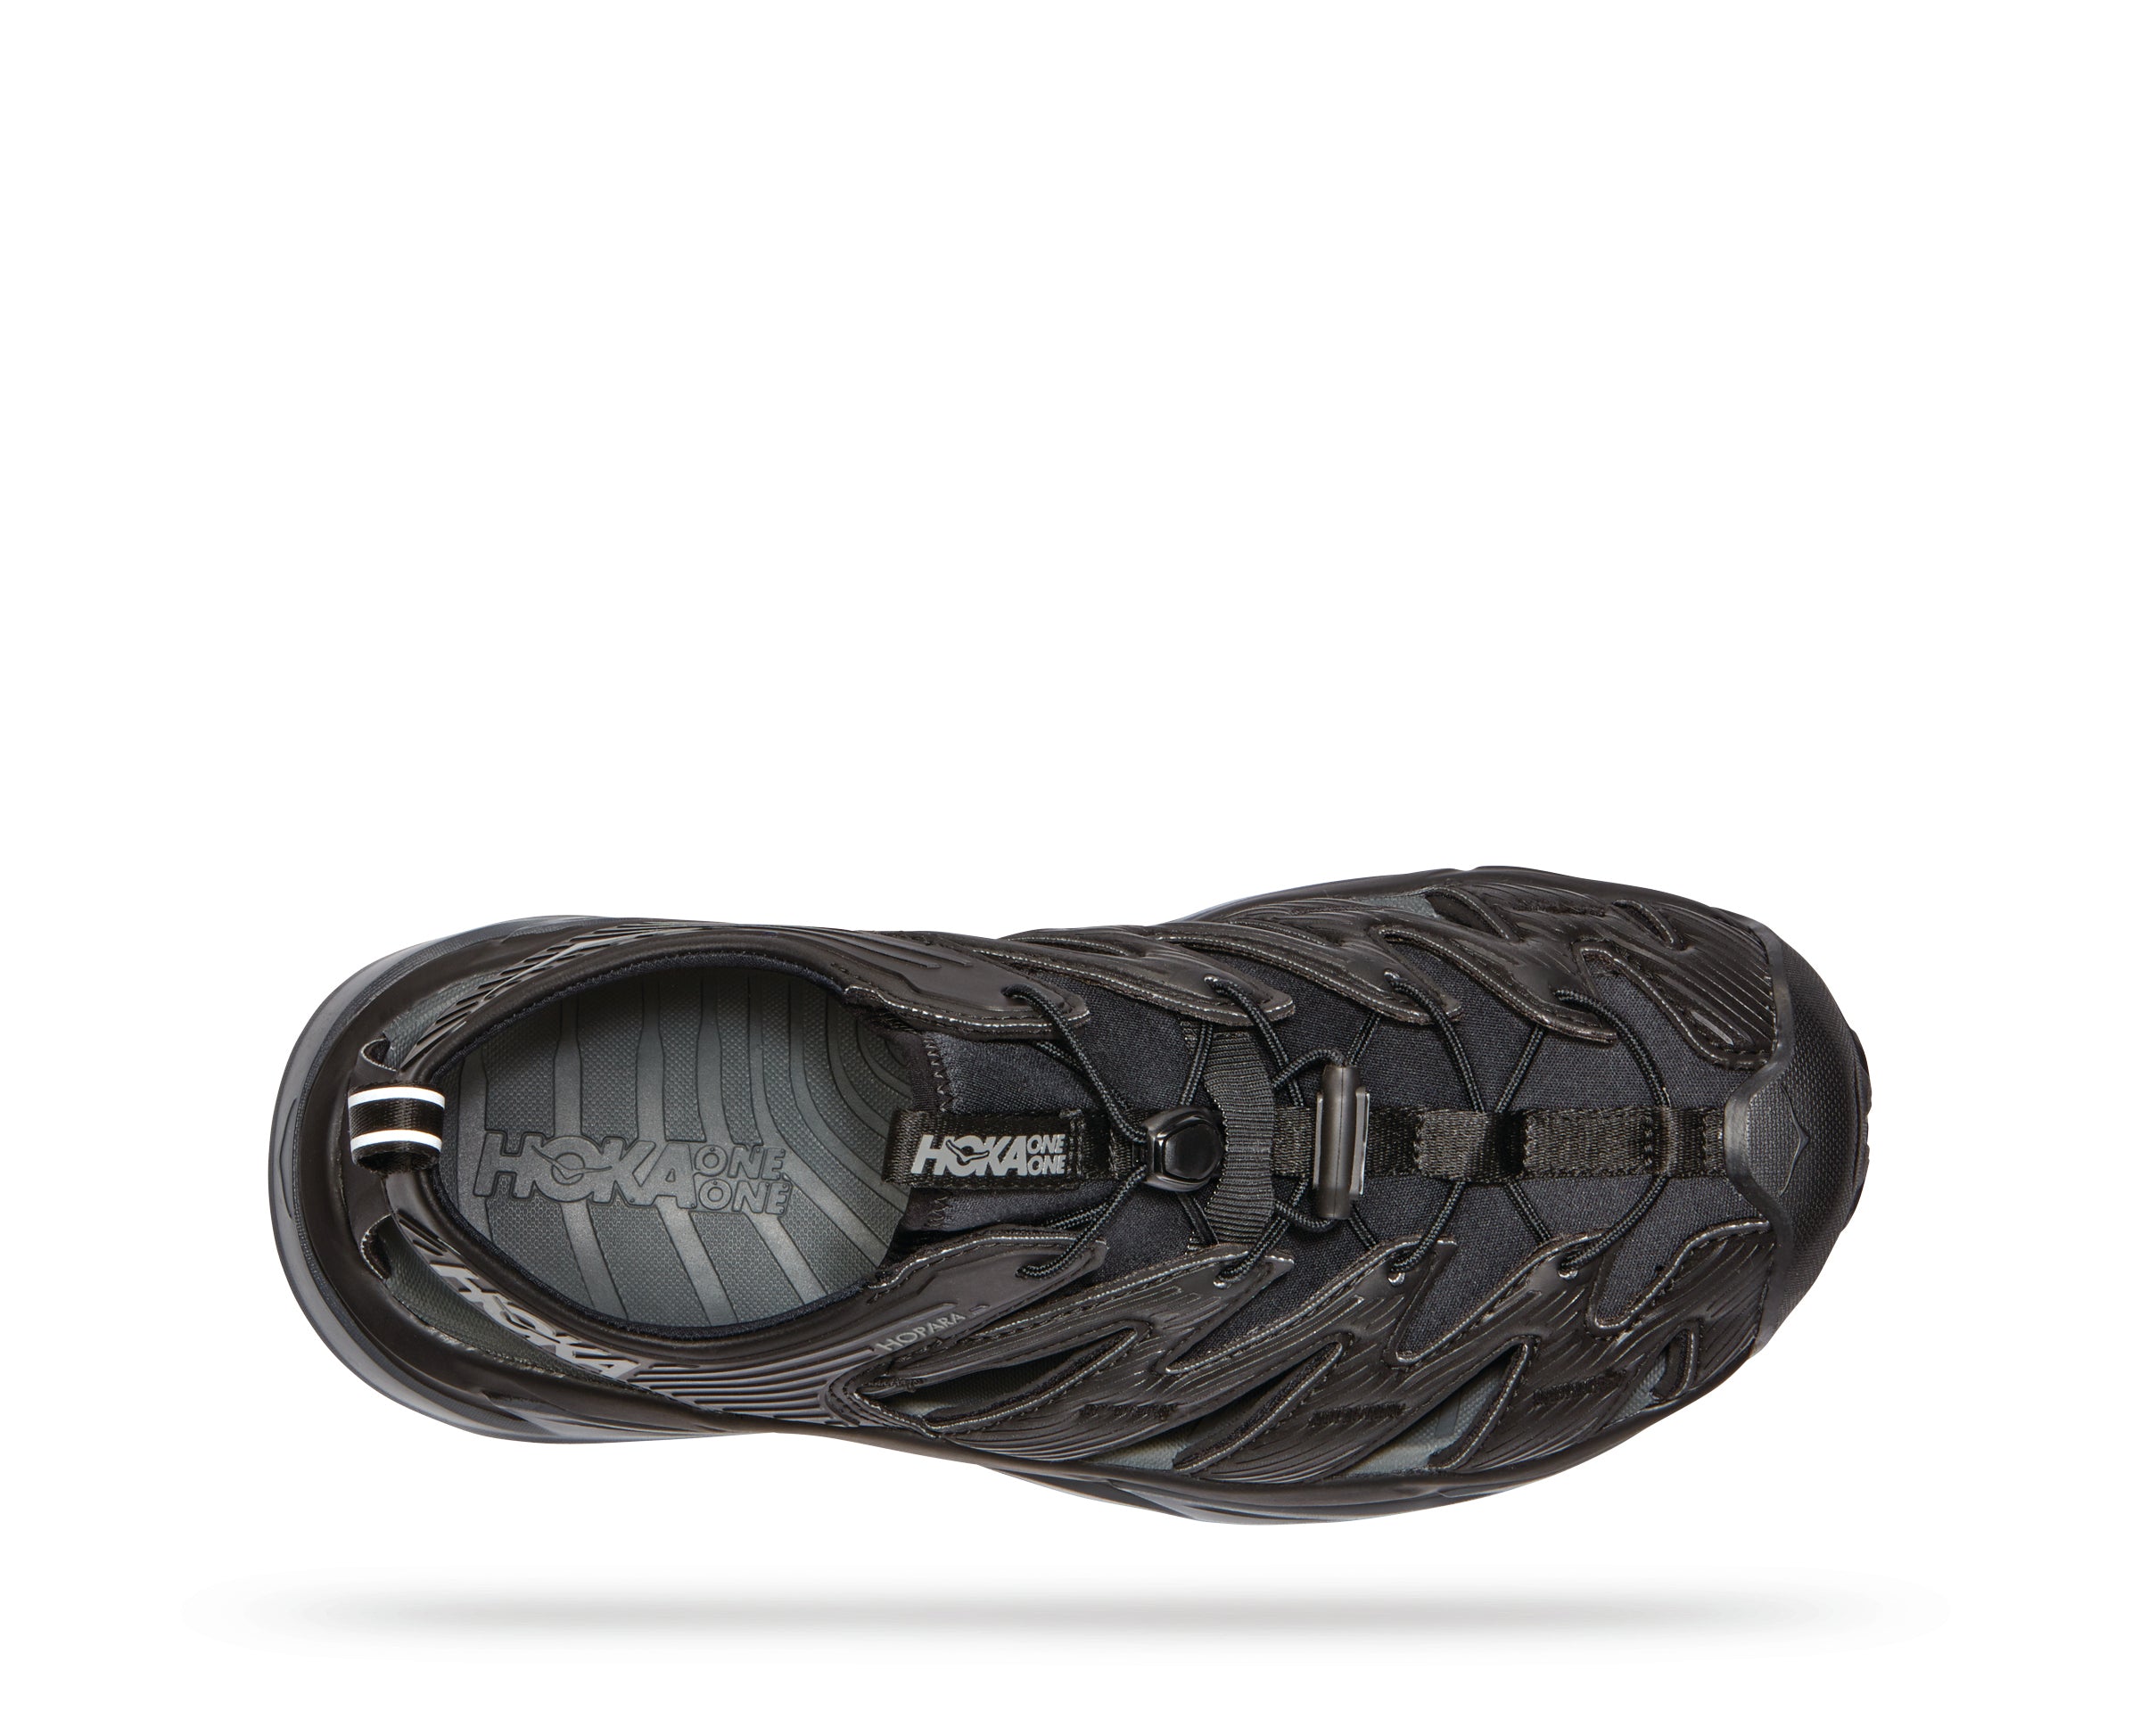 Top view of the Men's Hopara sandal by HOKA in Black